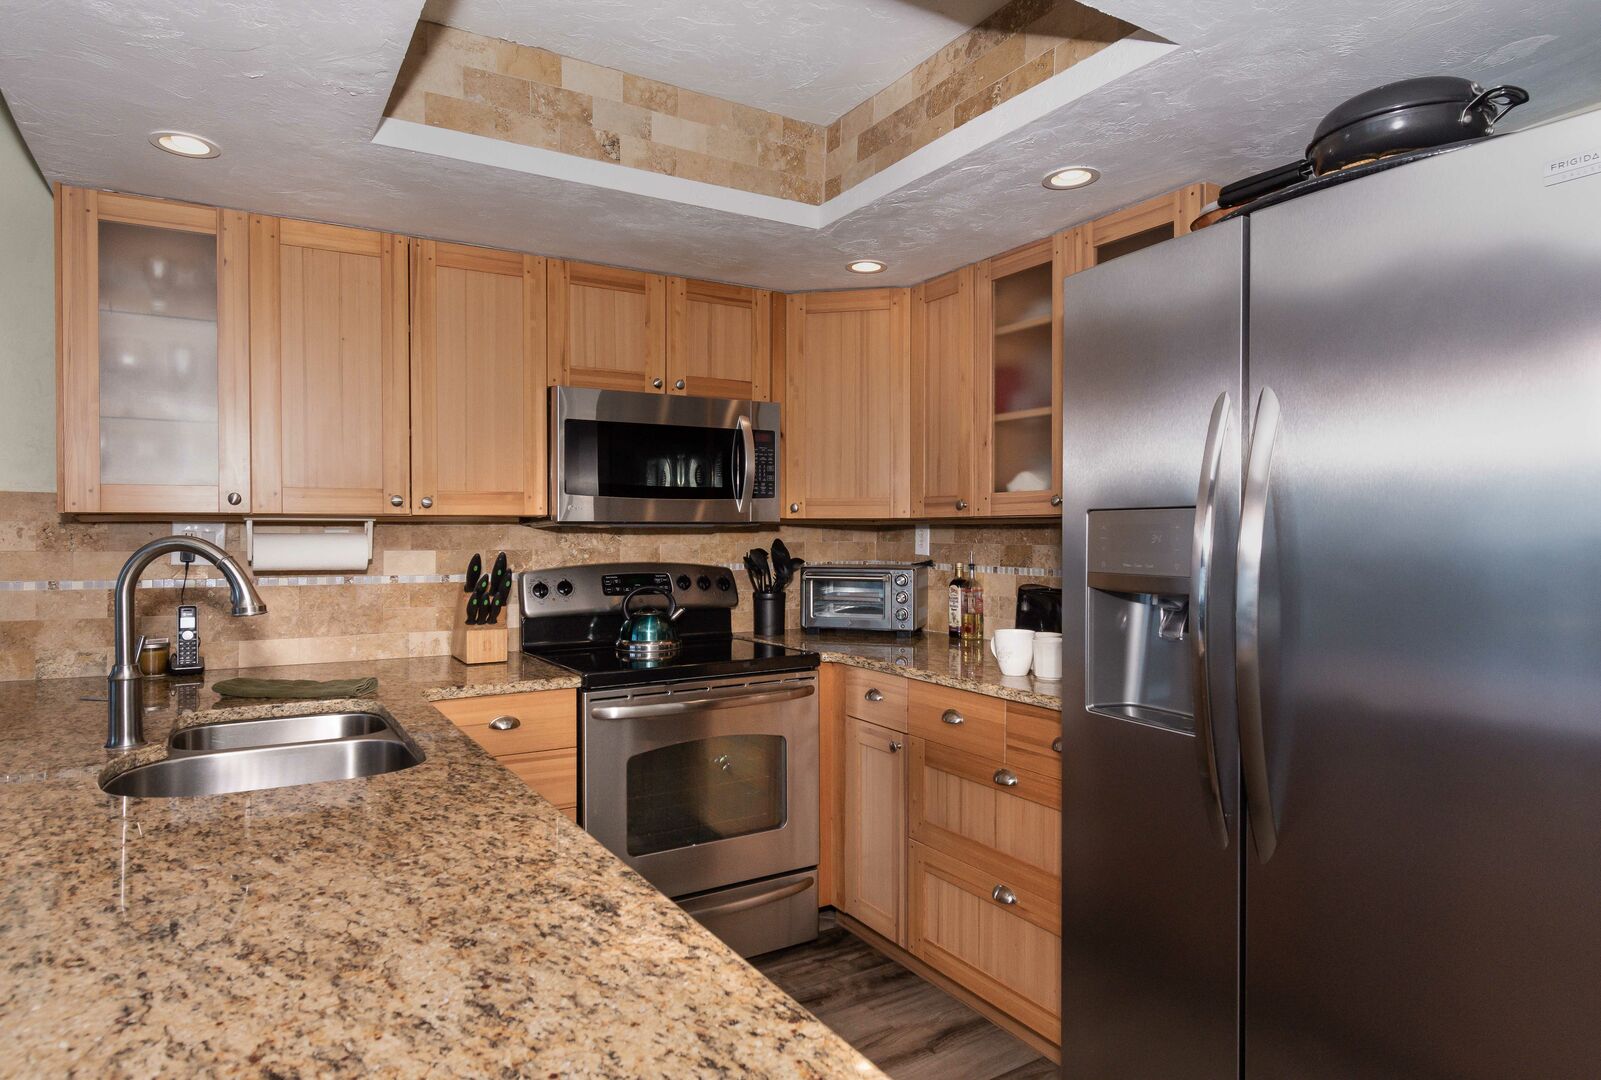 Open kitchen of this vacation condo in New Smyrna Beach with granite counter tops and stainless steel appliances.